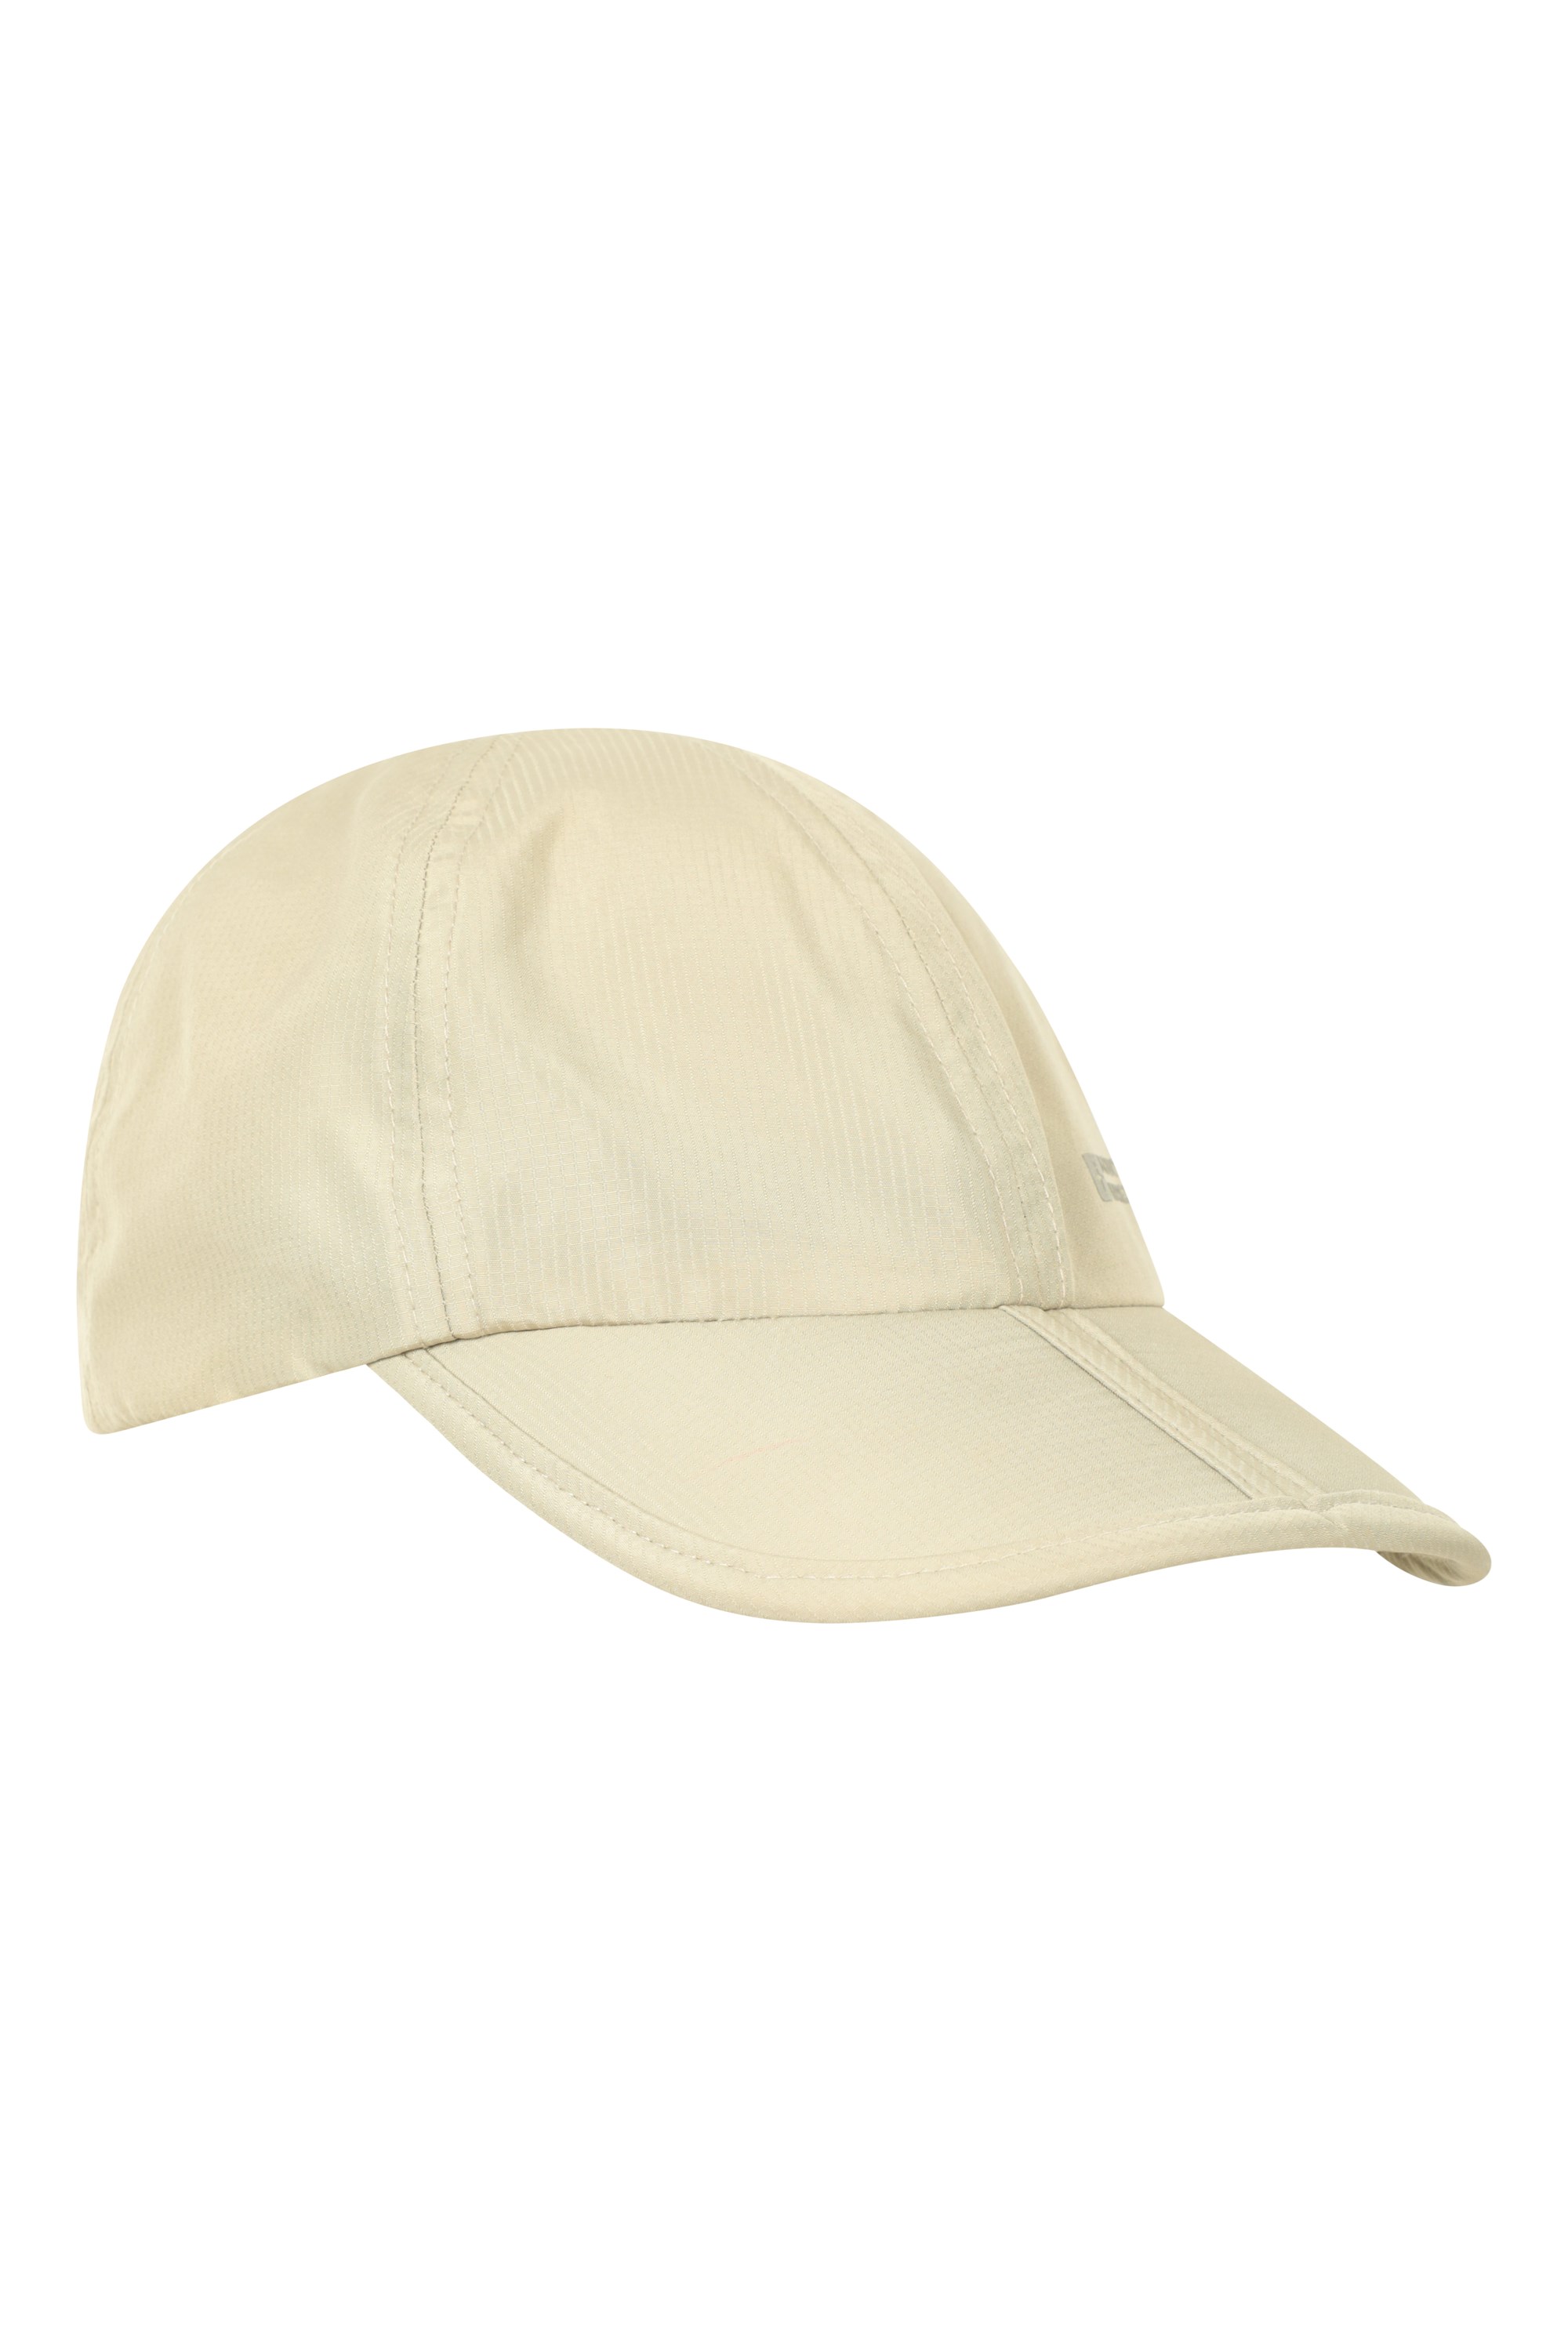 Travel Anti-Mosquito Packable Cap - Grey